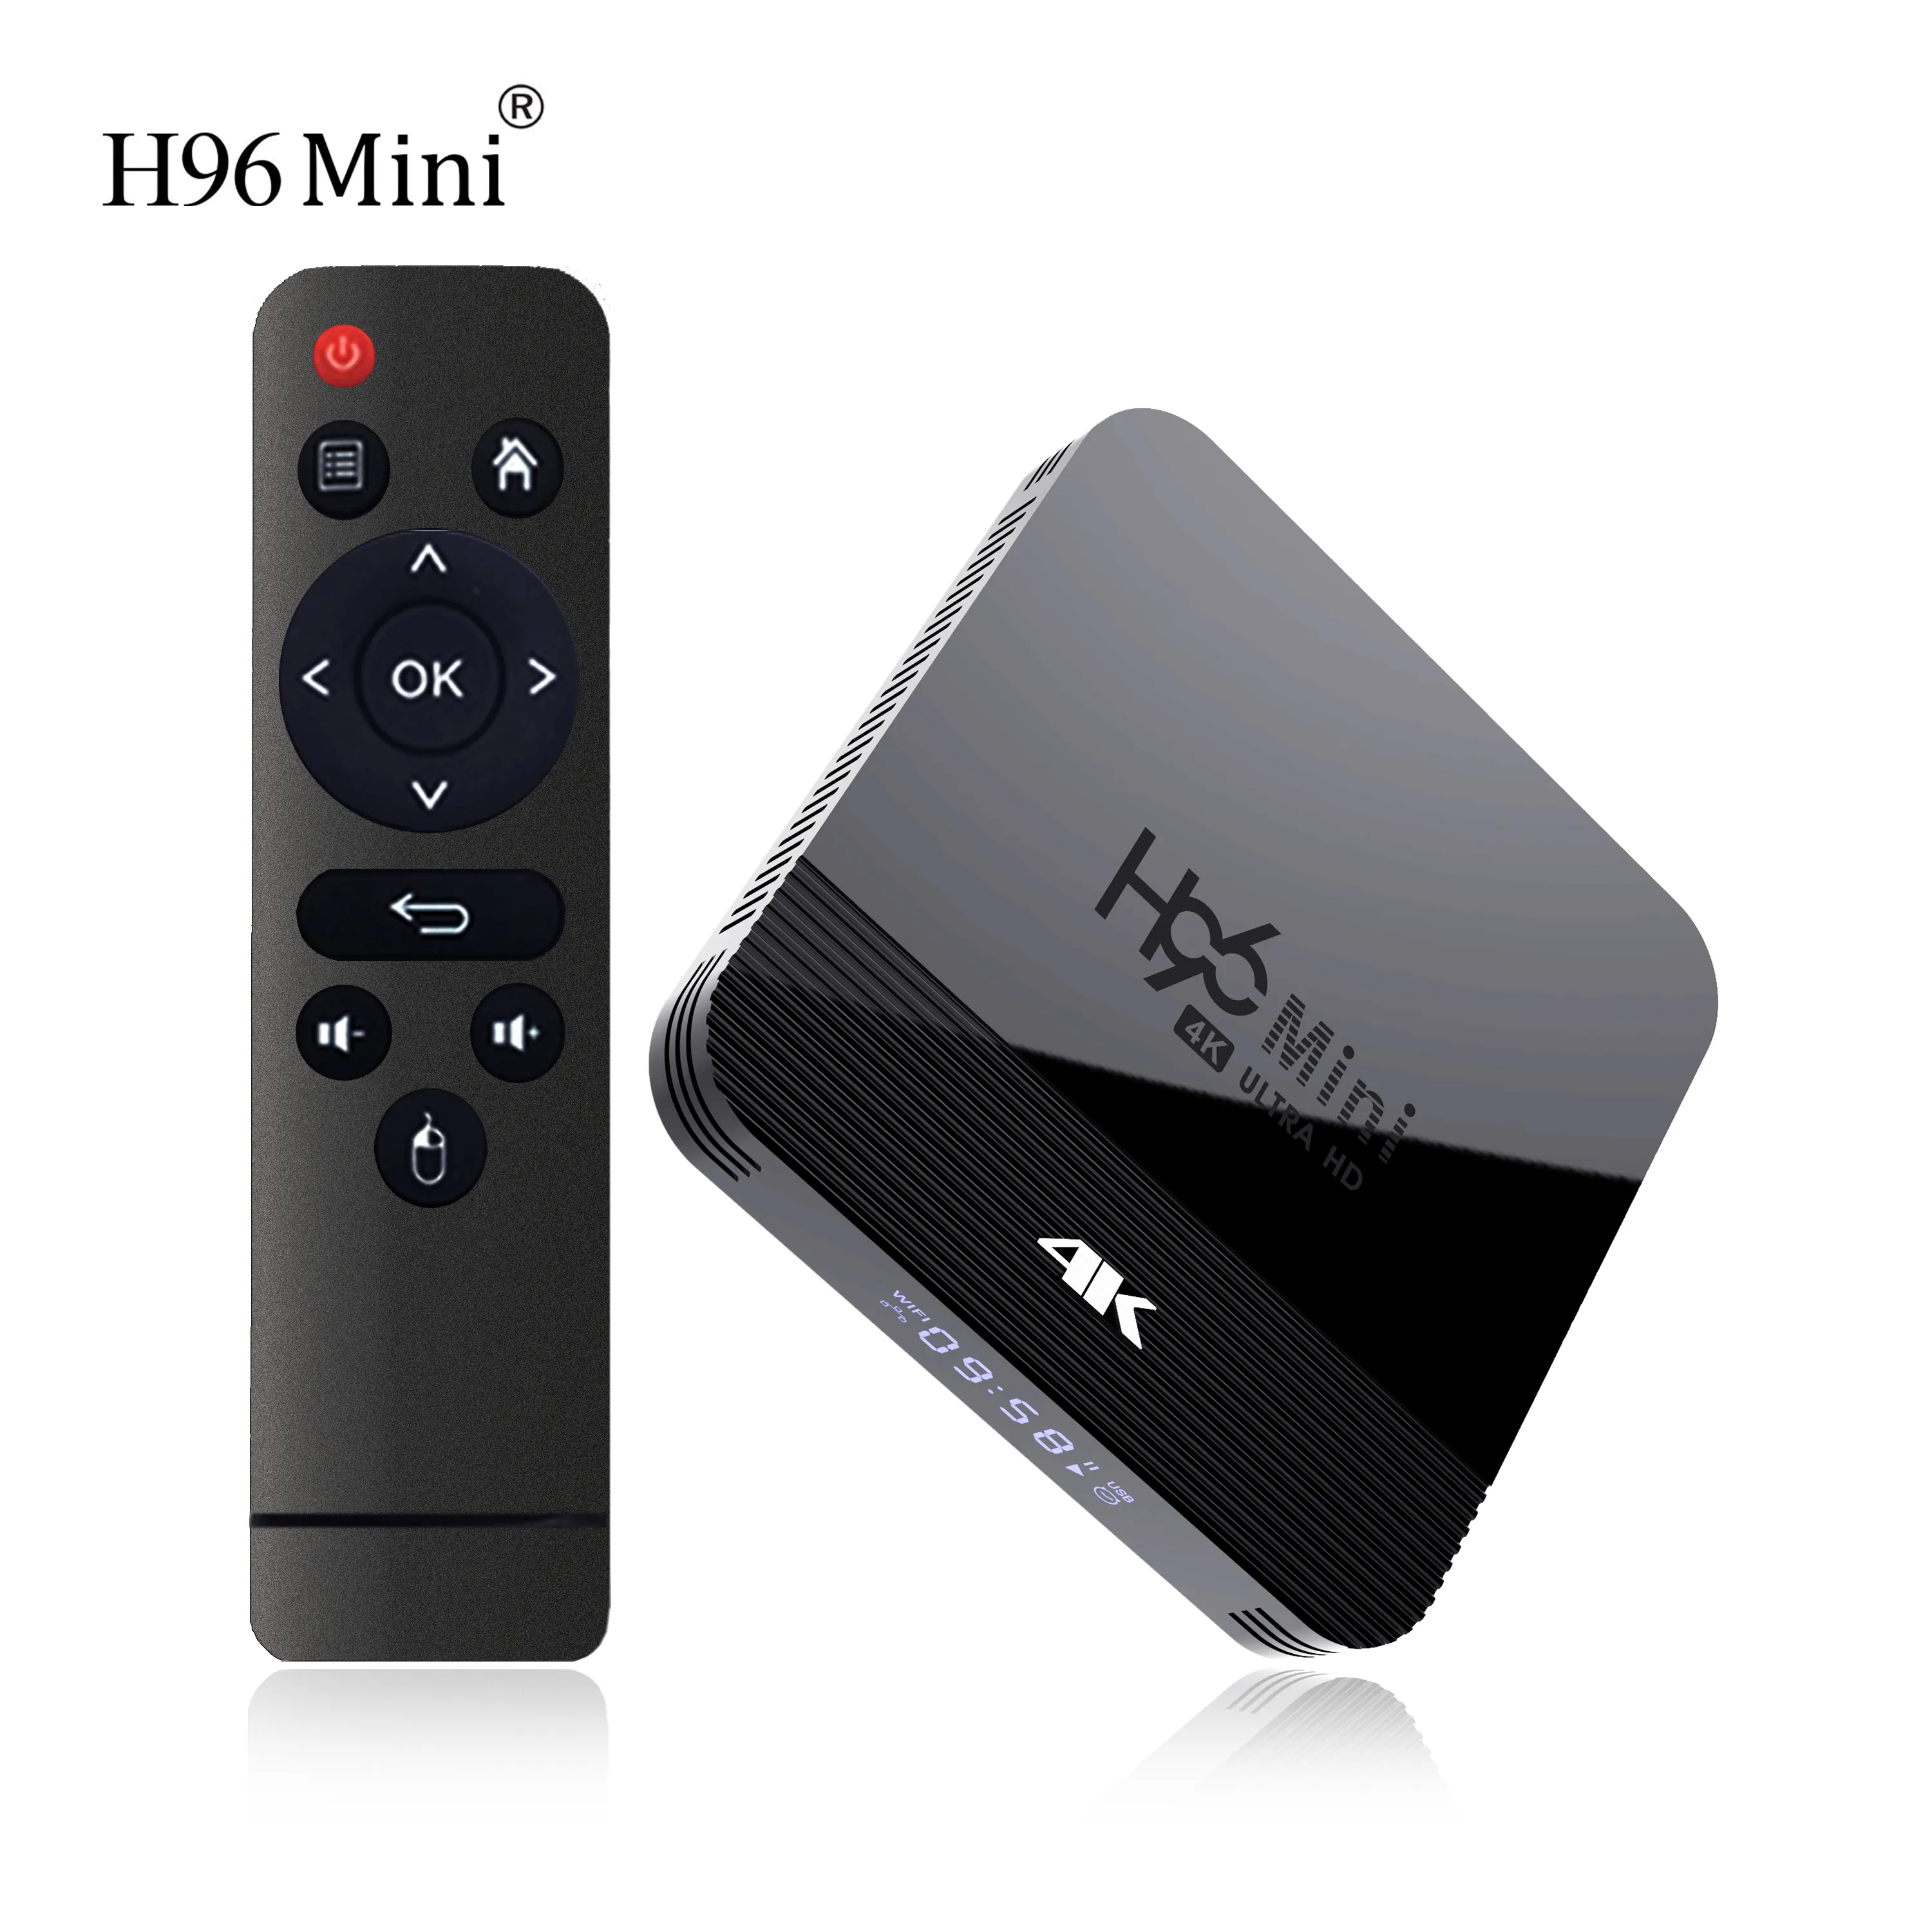 2020 New Arrival Android Media Player H96 Mini H8 2Gb/16Gb Dual Wifi Bt 4.0 RK3228A Android Tv Box H96Mini